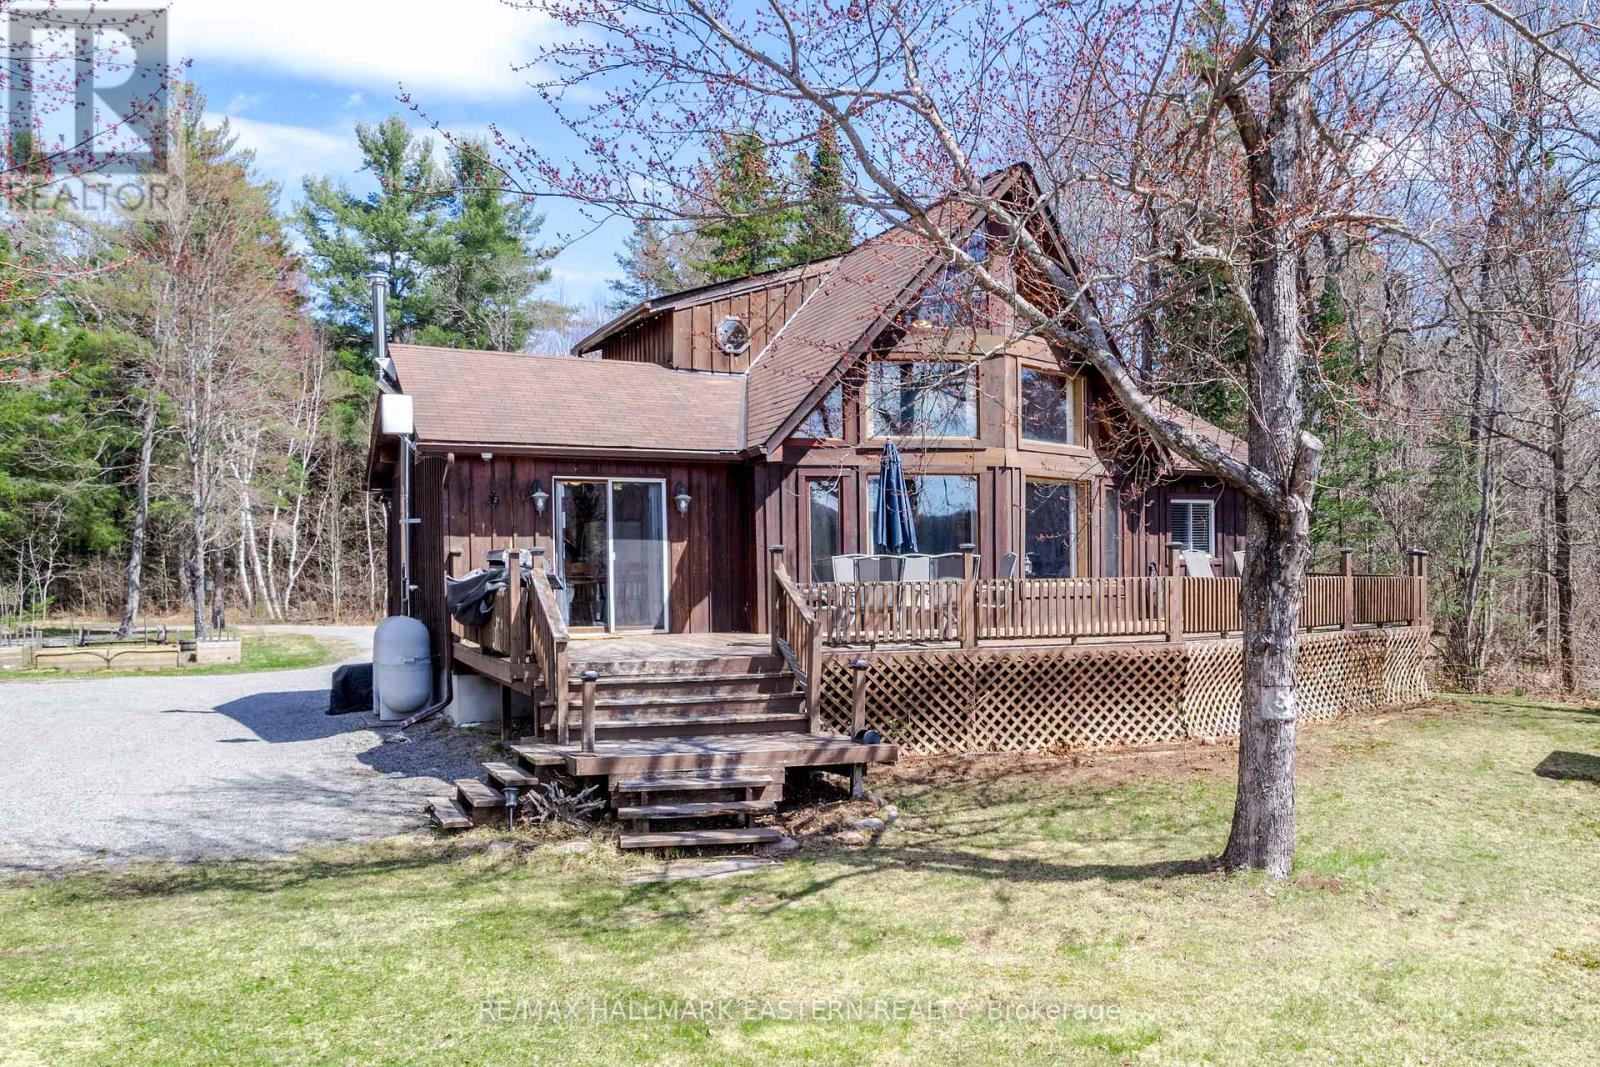 152A PARADISE LANDING ROAD, hastings highlands, Ontario